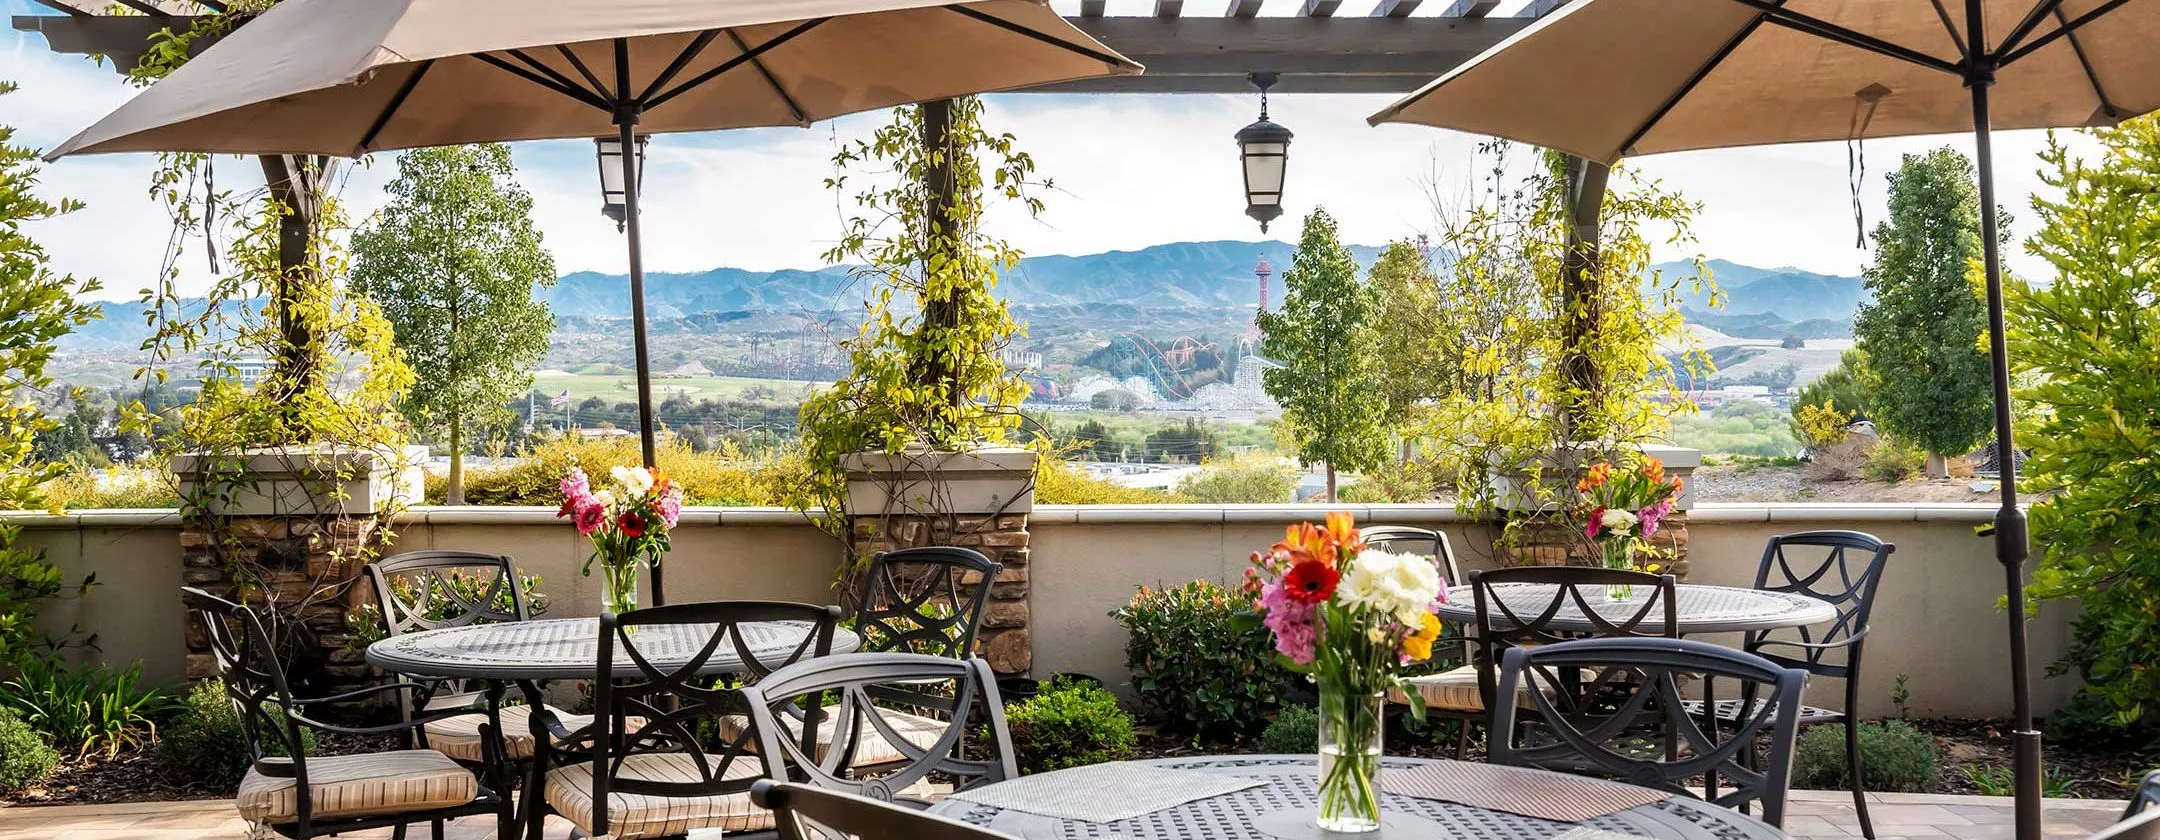 Santa Clarita patio with view and dining tables